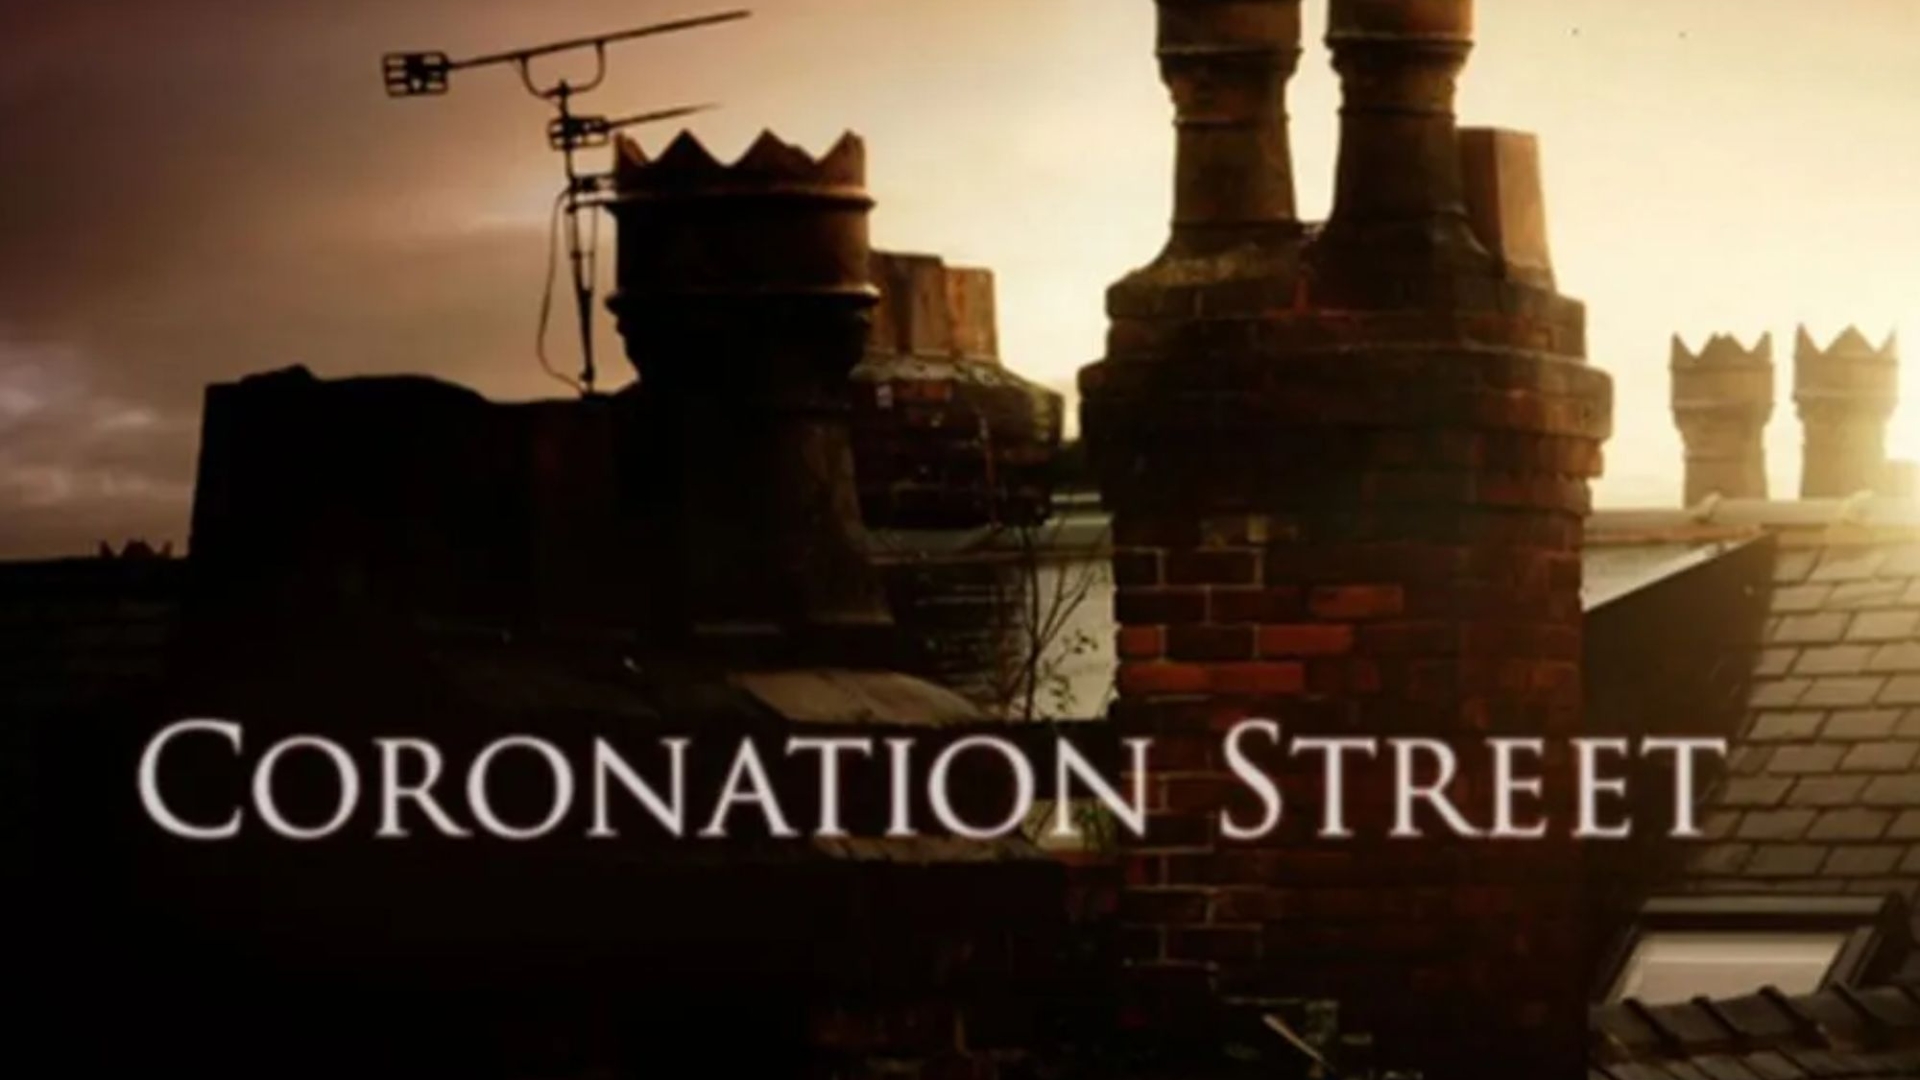 I am a big Coronation Street fan. Here are the things I think have gone horribly wrong.